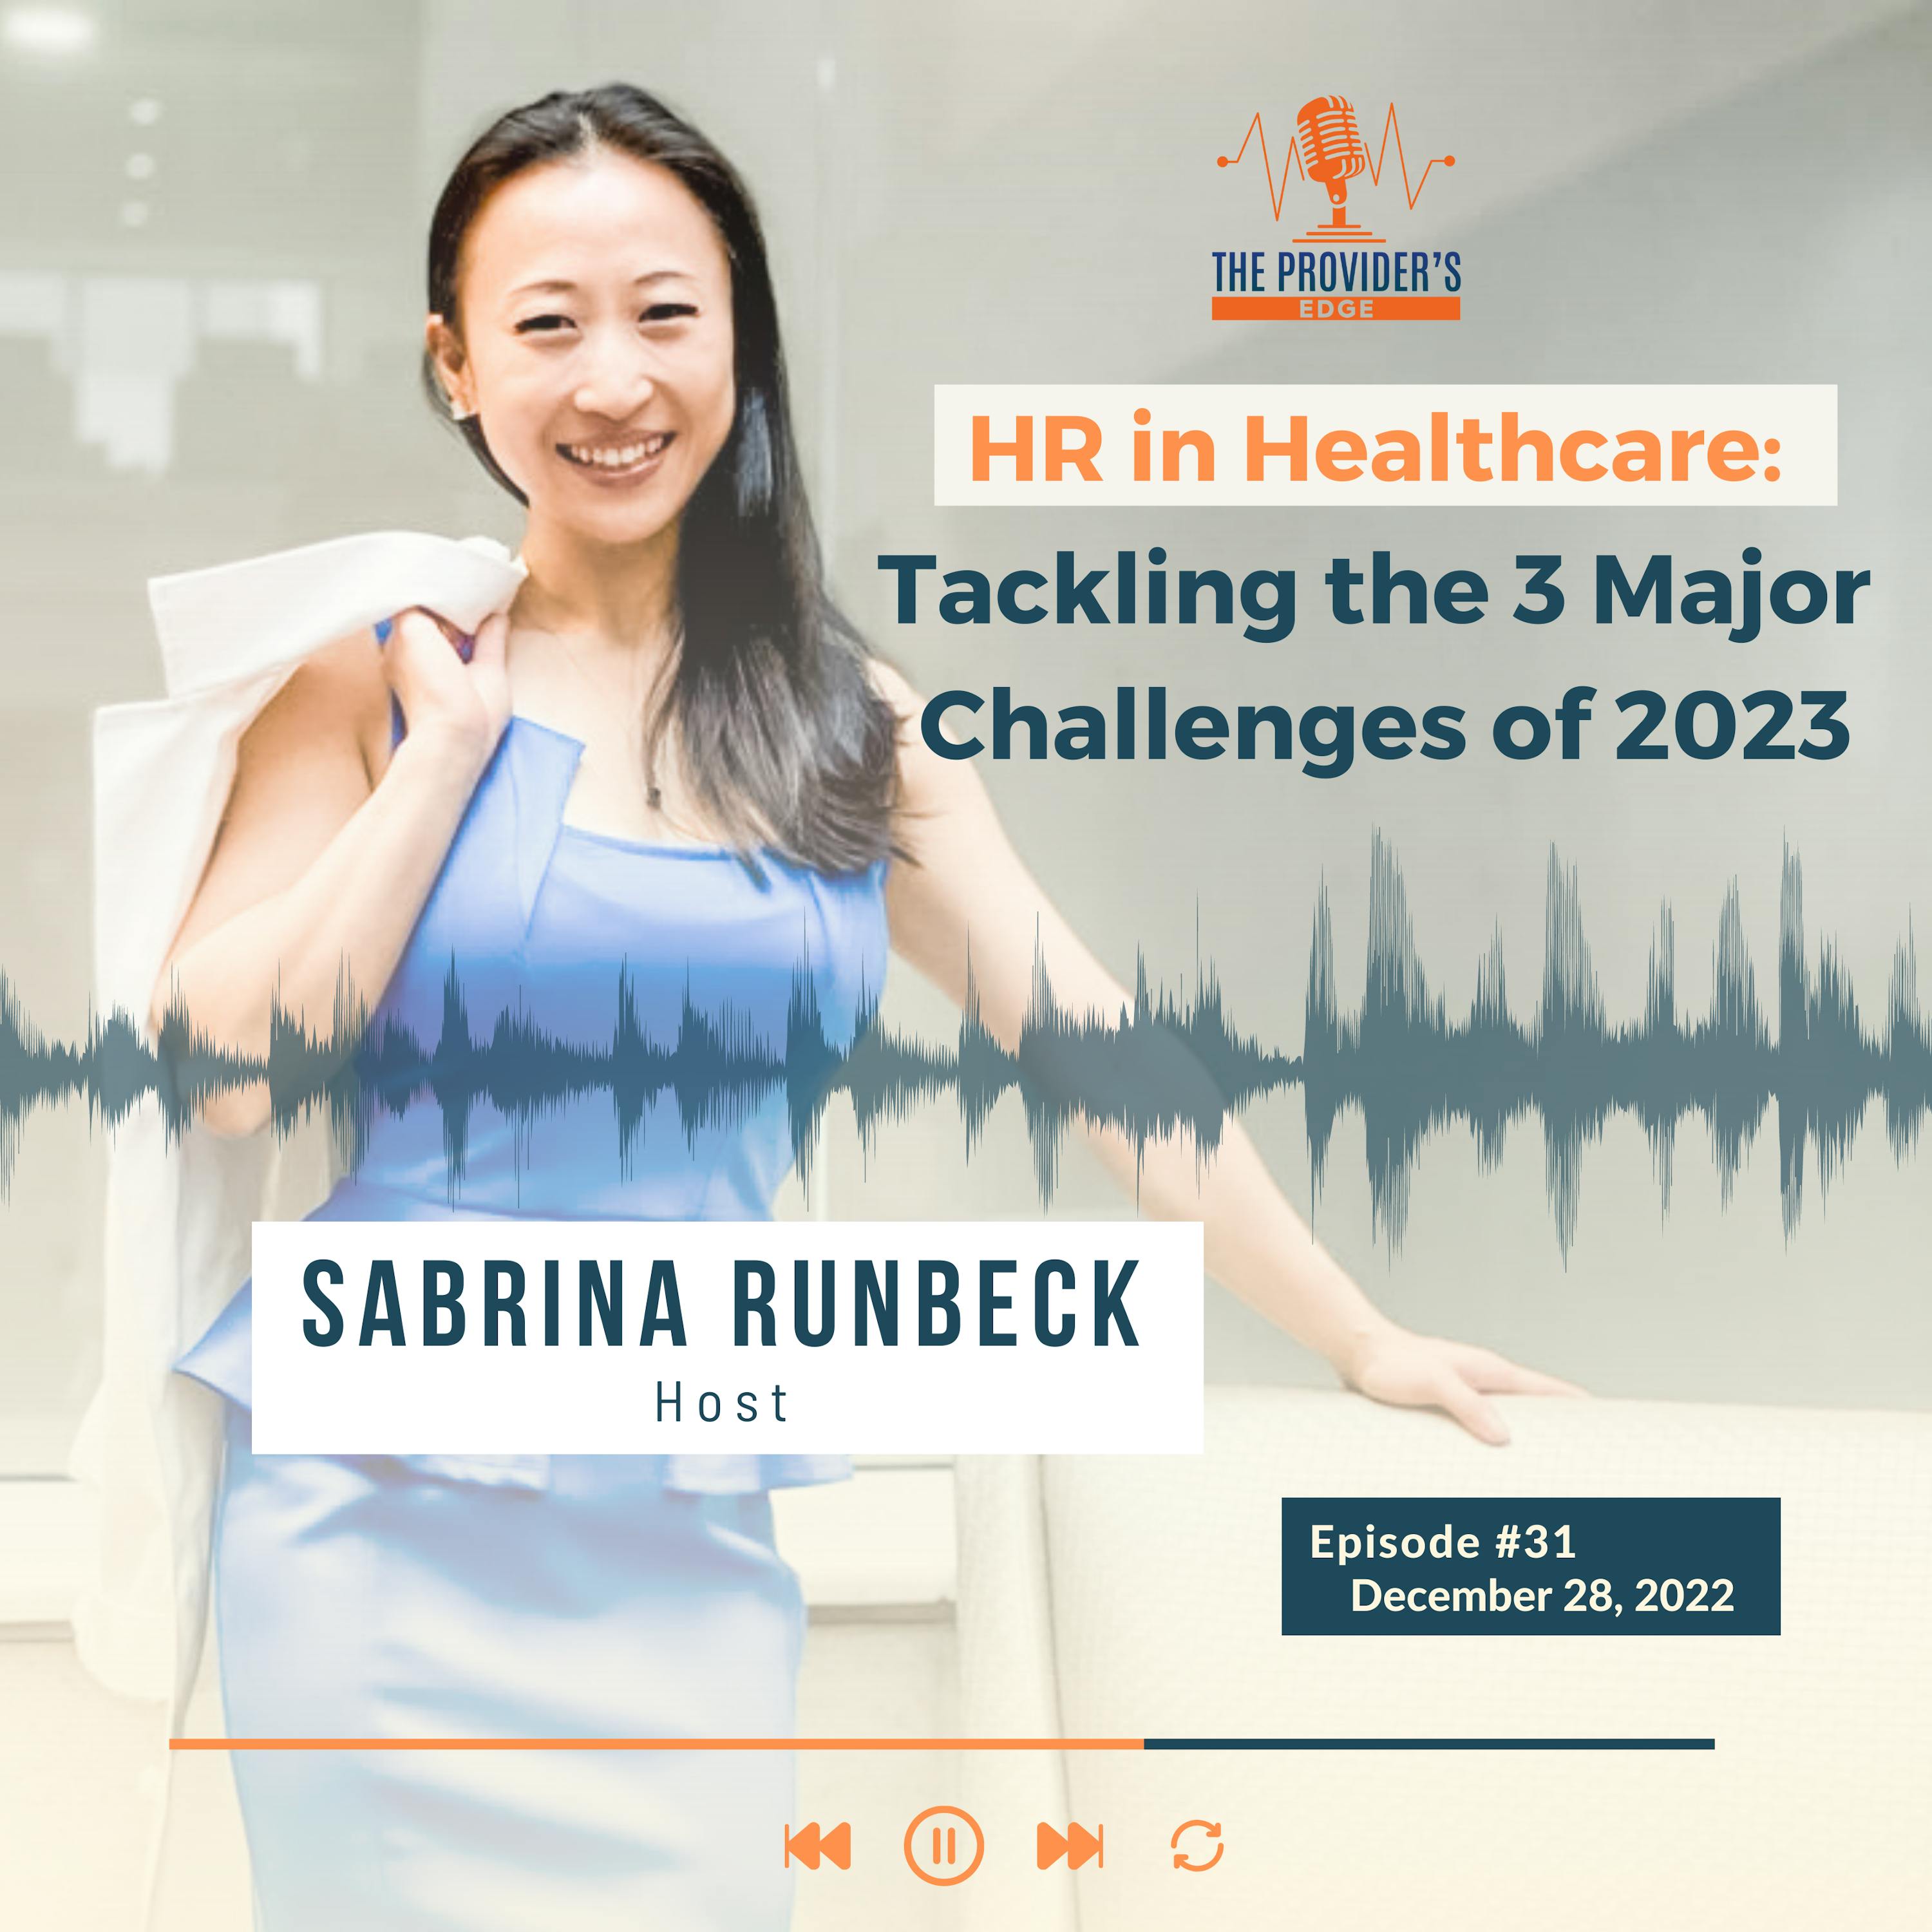 HR in Healthcare: Tackling the 3 Major Challenges of 2023 with Sabrina Runbeck ep 31